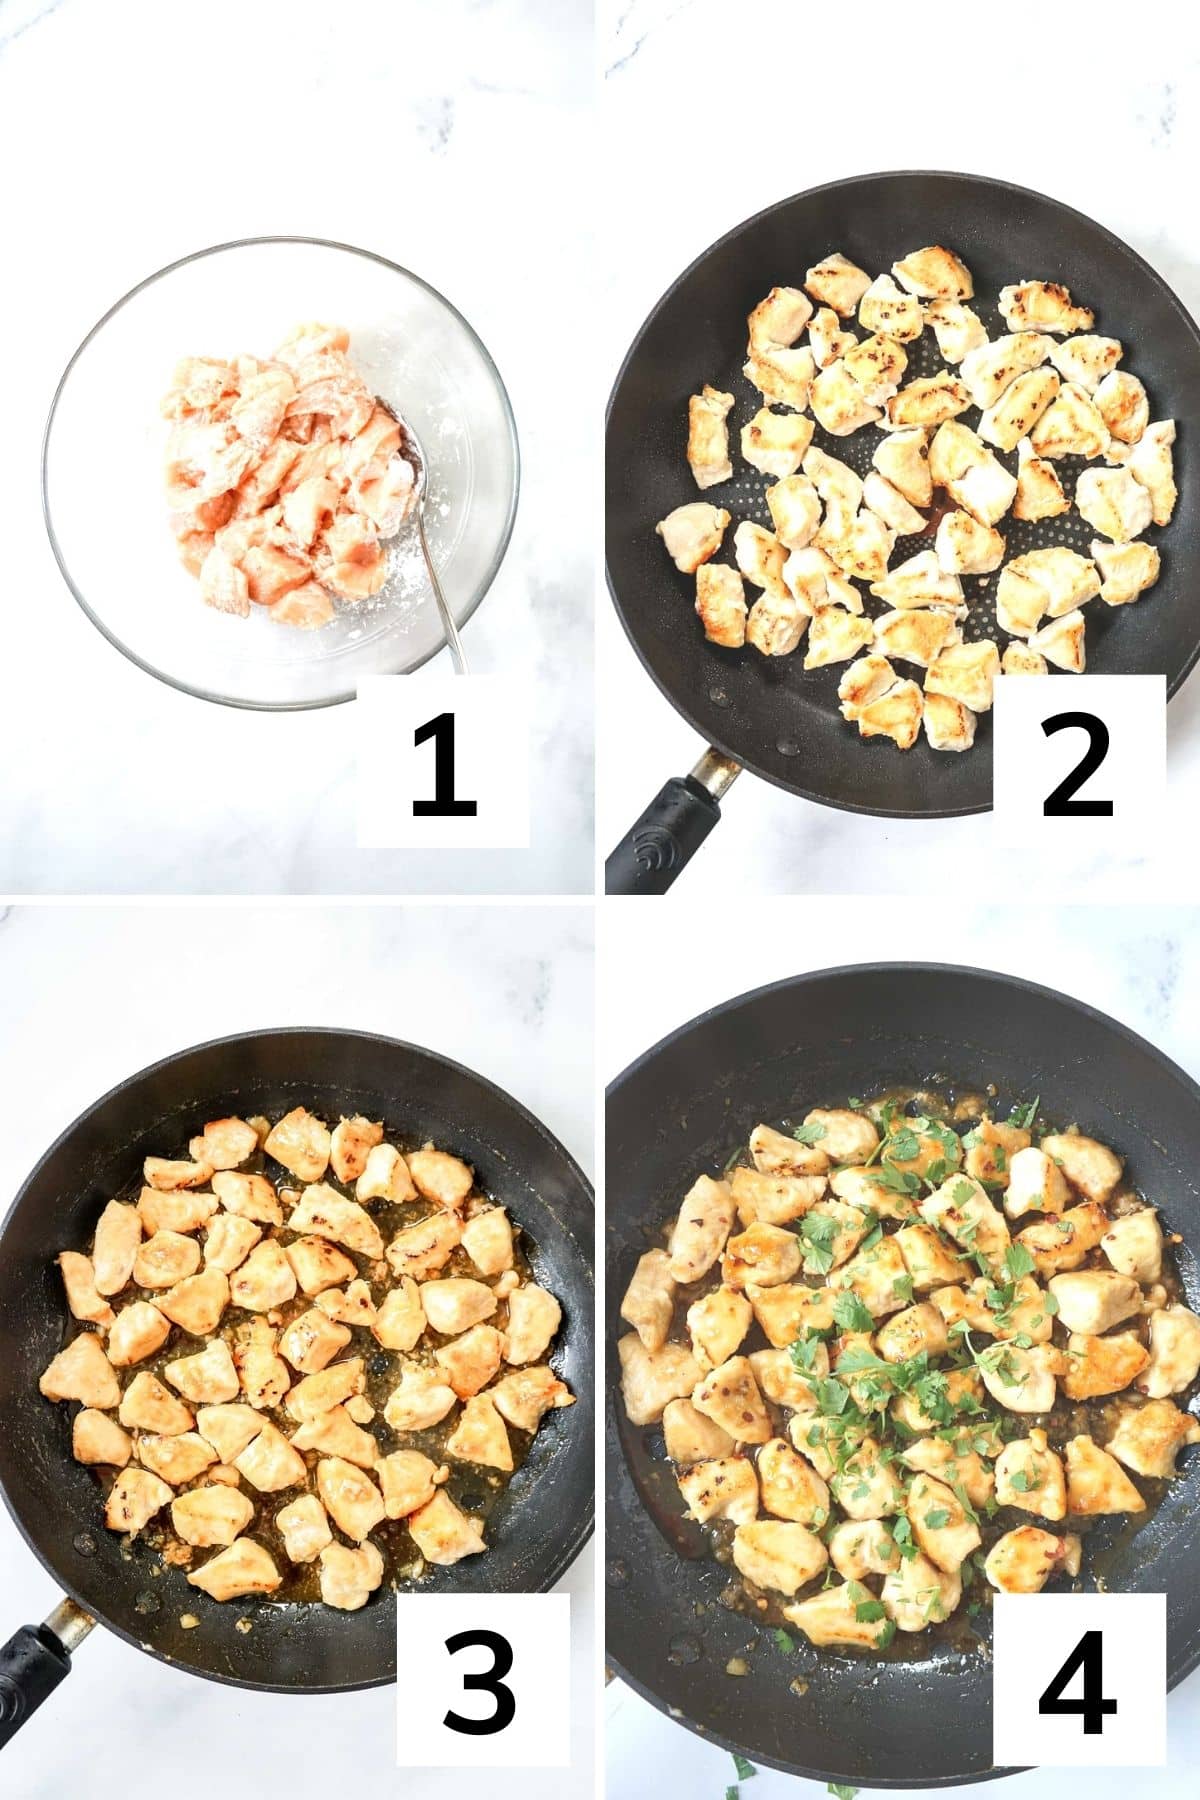 How to make honey butter garlic chicken step by step.